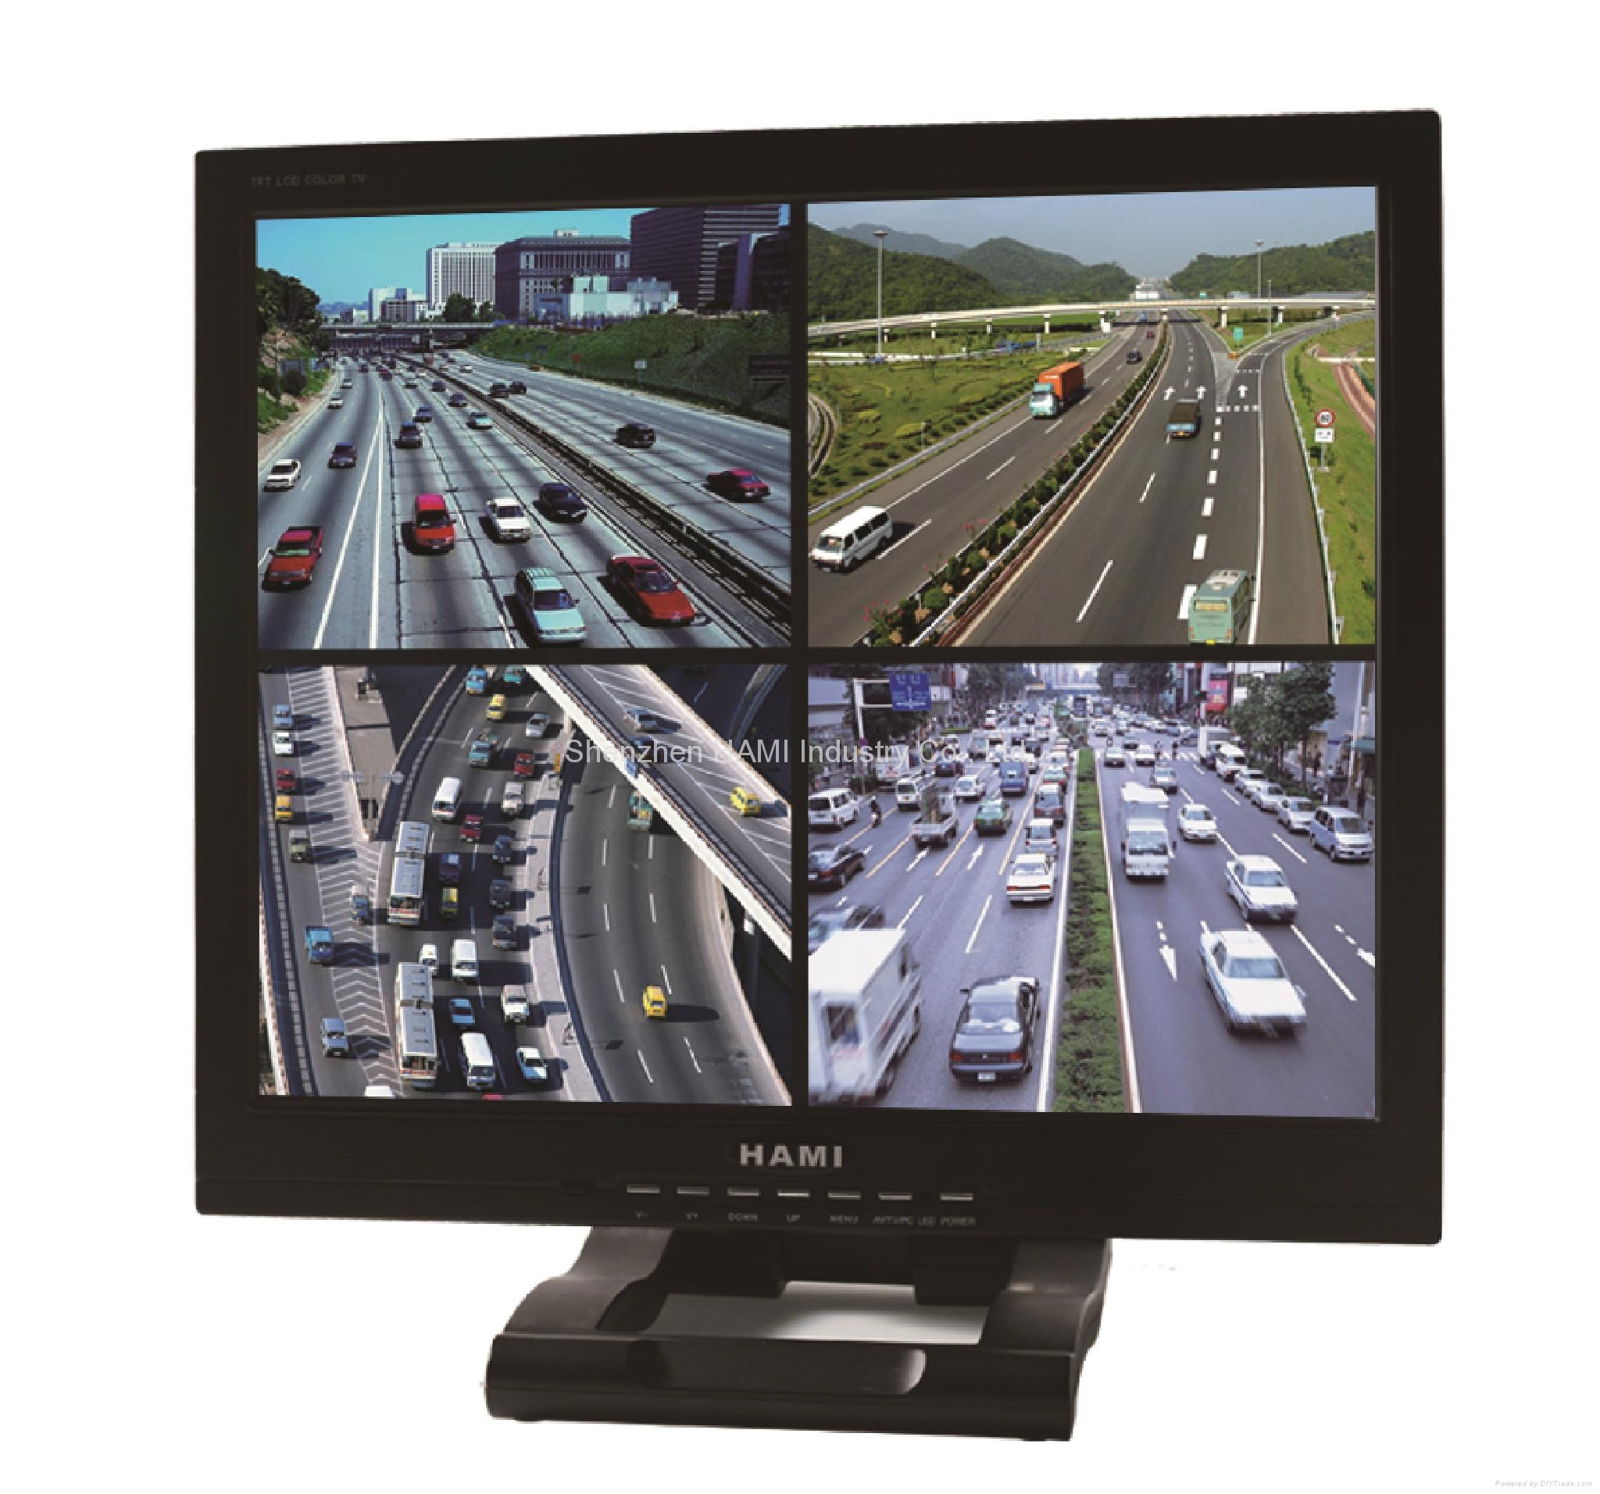 17" solid industry TFT monitor